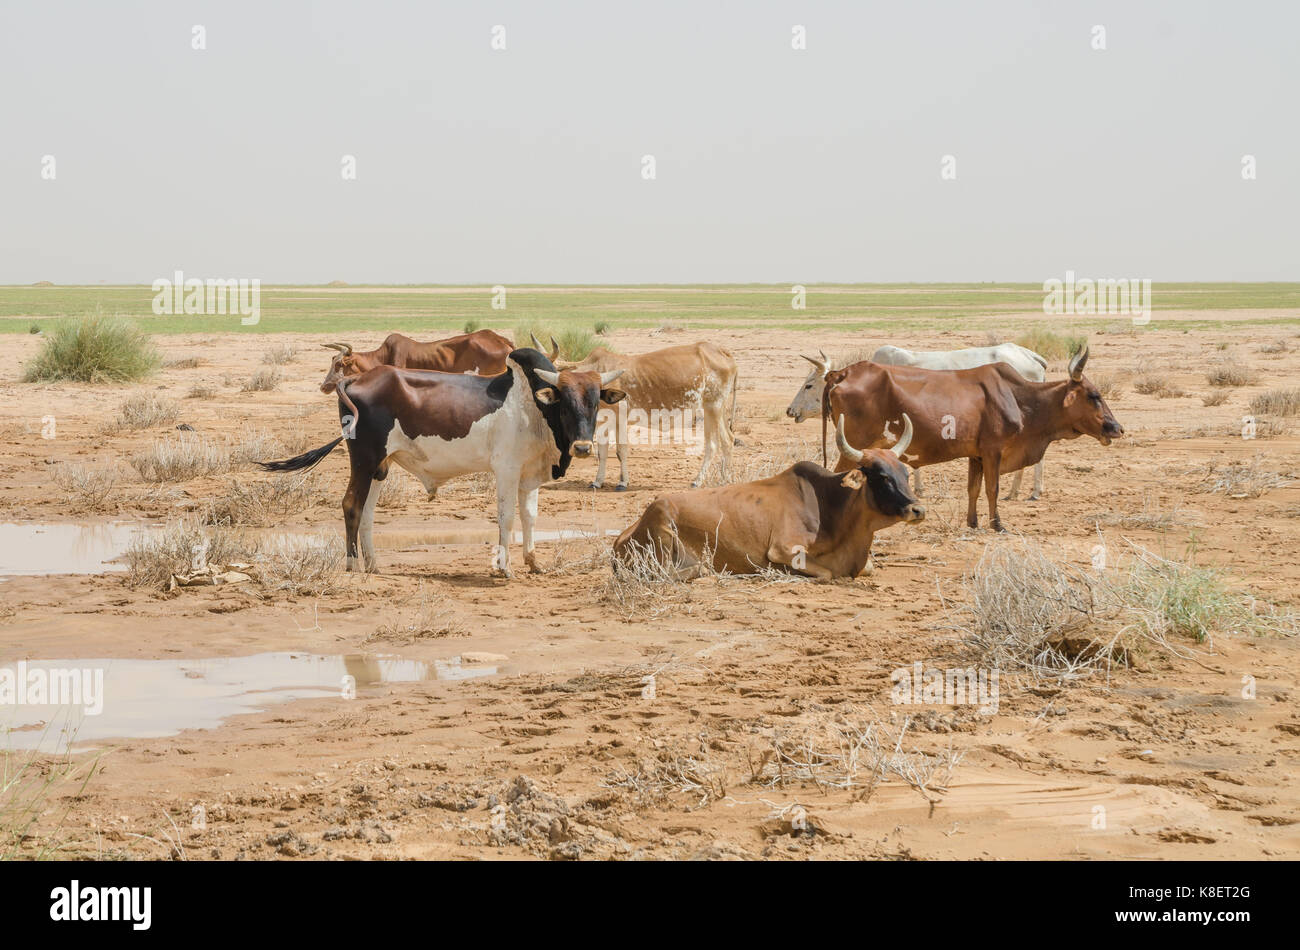 Mauritanian cattle with bulls and cows in the Sahara desert at waterhole, Mauritania, North Africa. Stock Photo